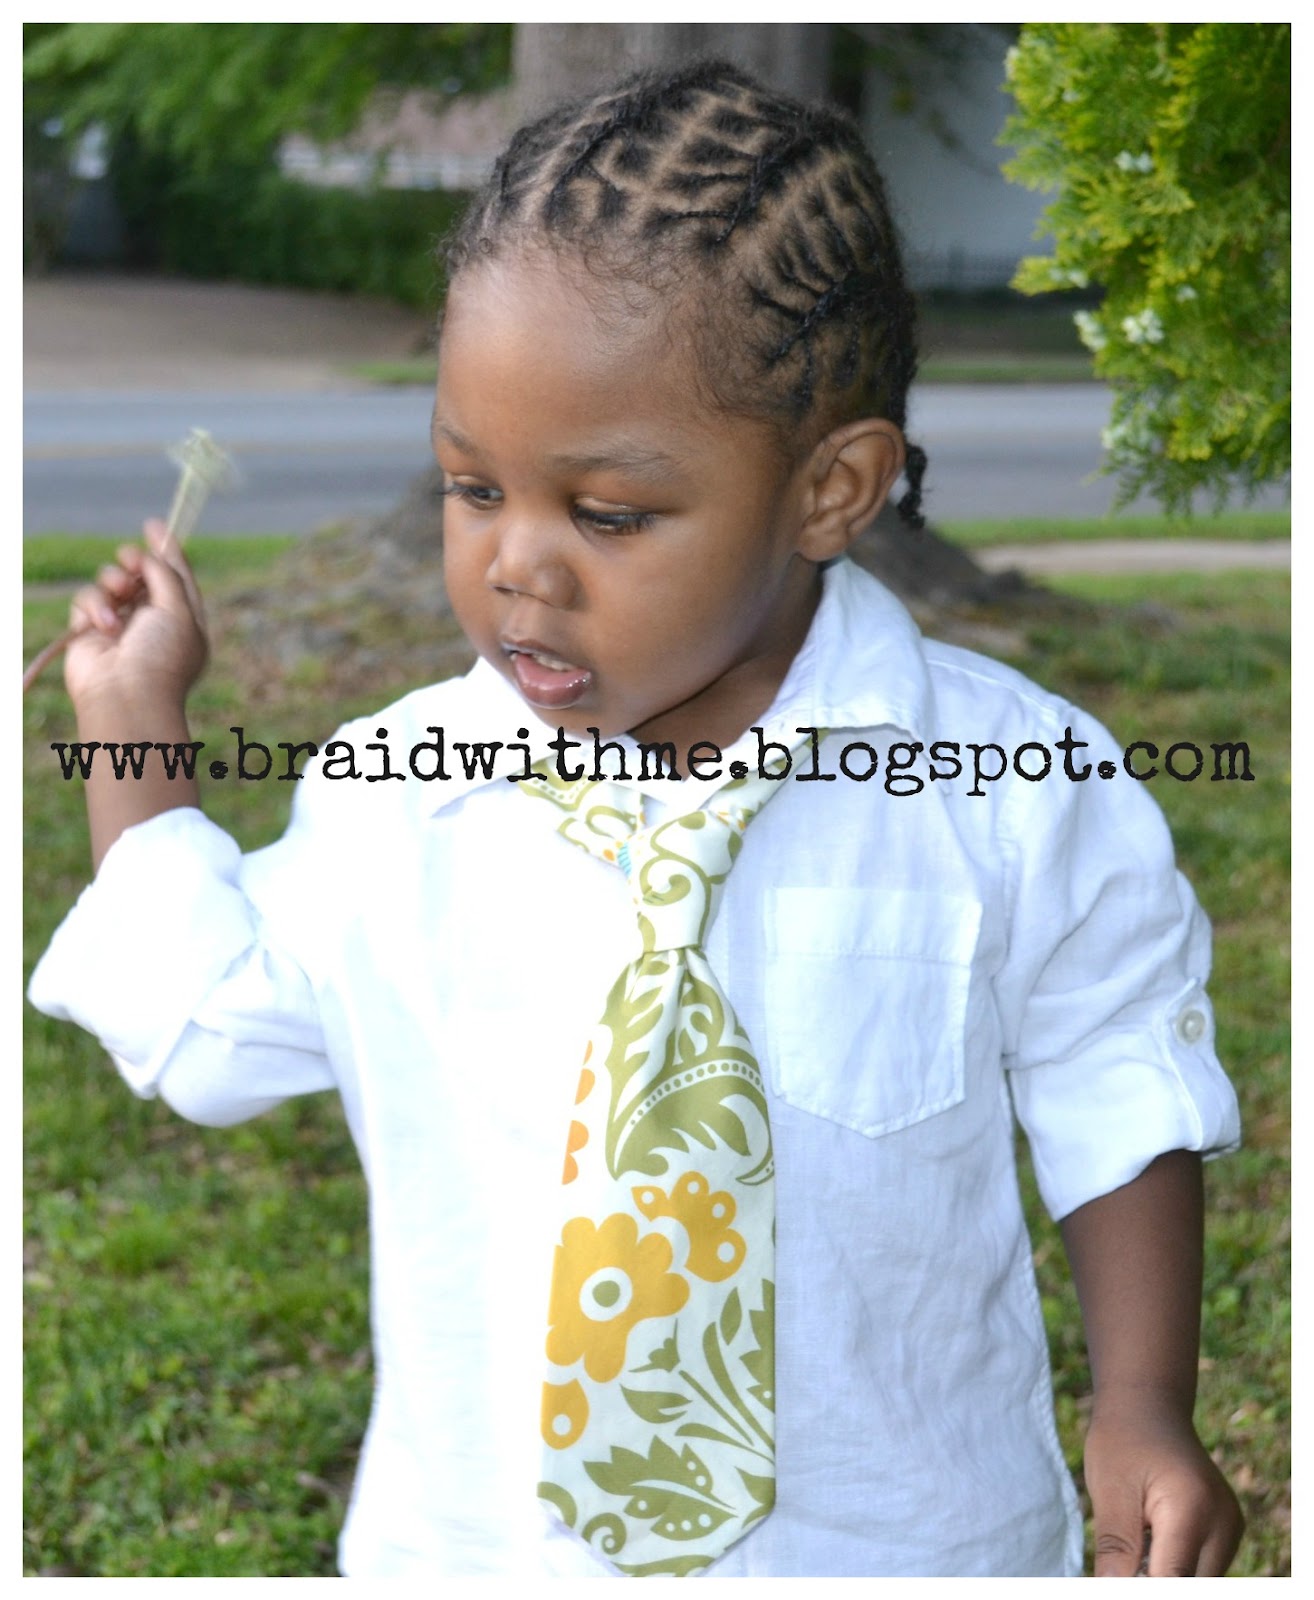 Braided Hairstyles To The Side For Black Women He also sported this style for Easter without the rubberbands.